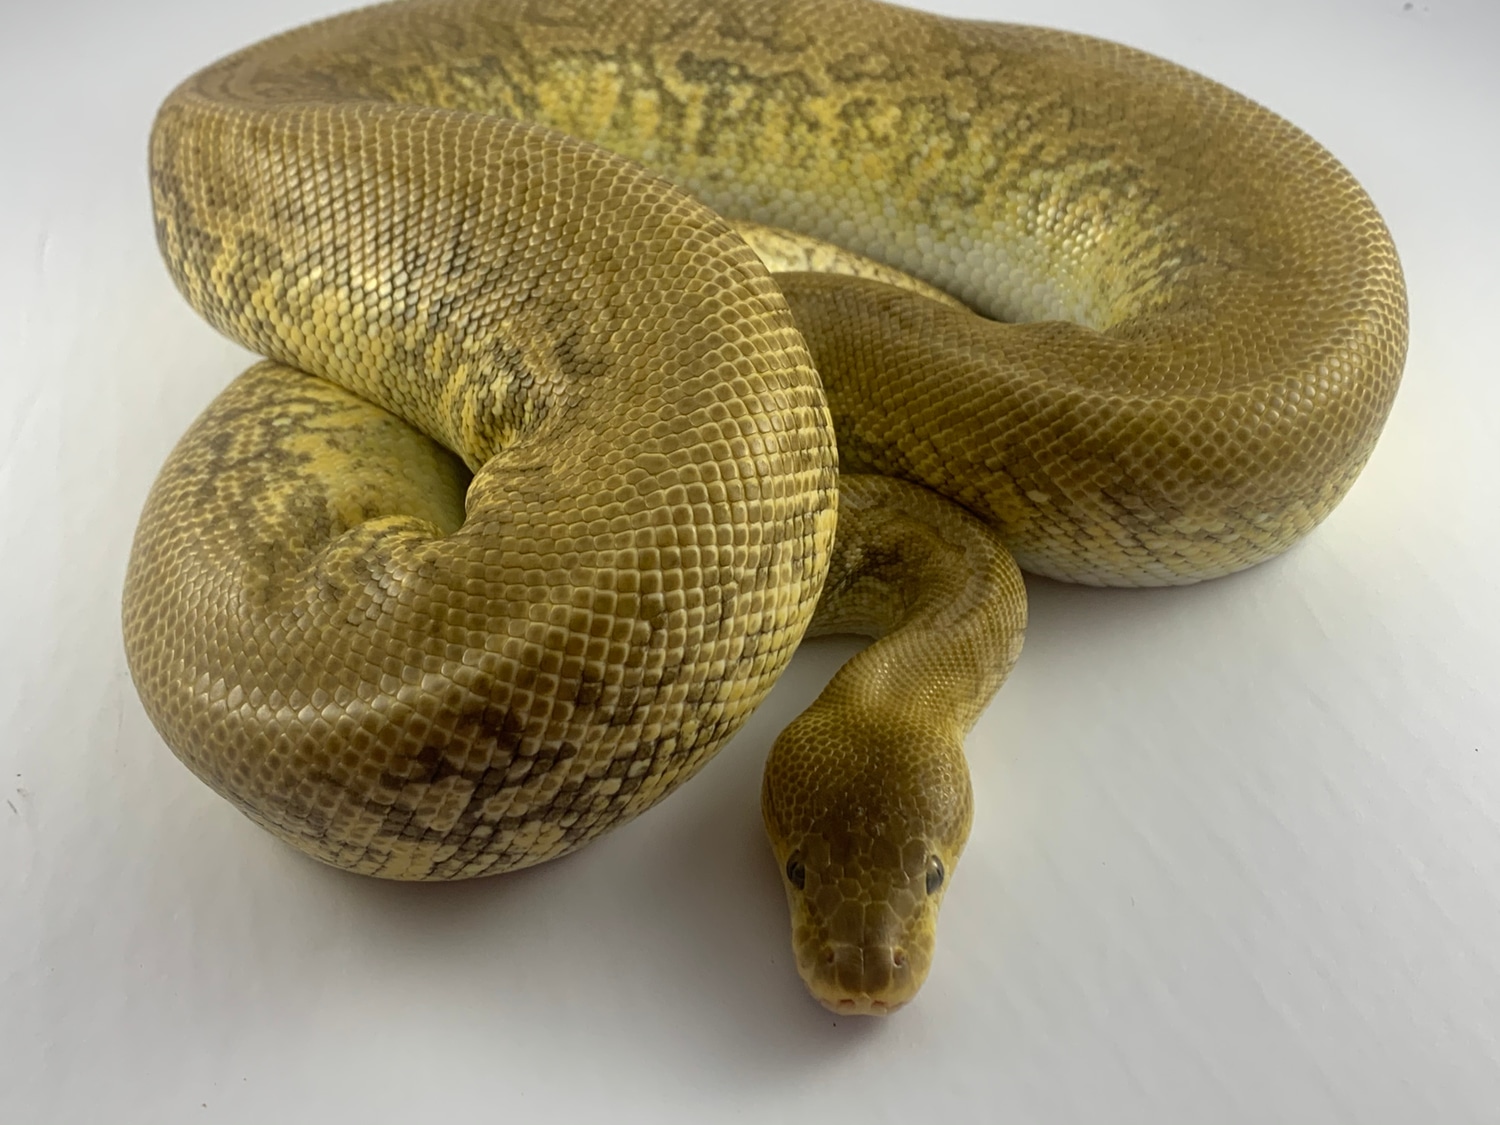 Pastave Monsoon Ball Python by West Texas Royal Pythons